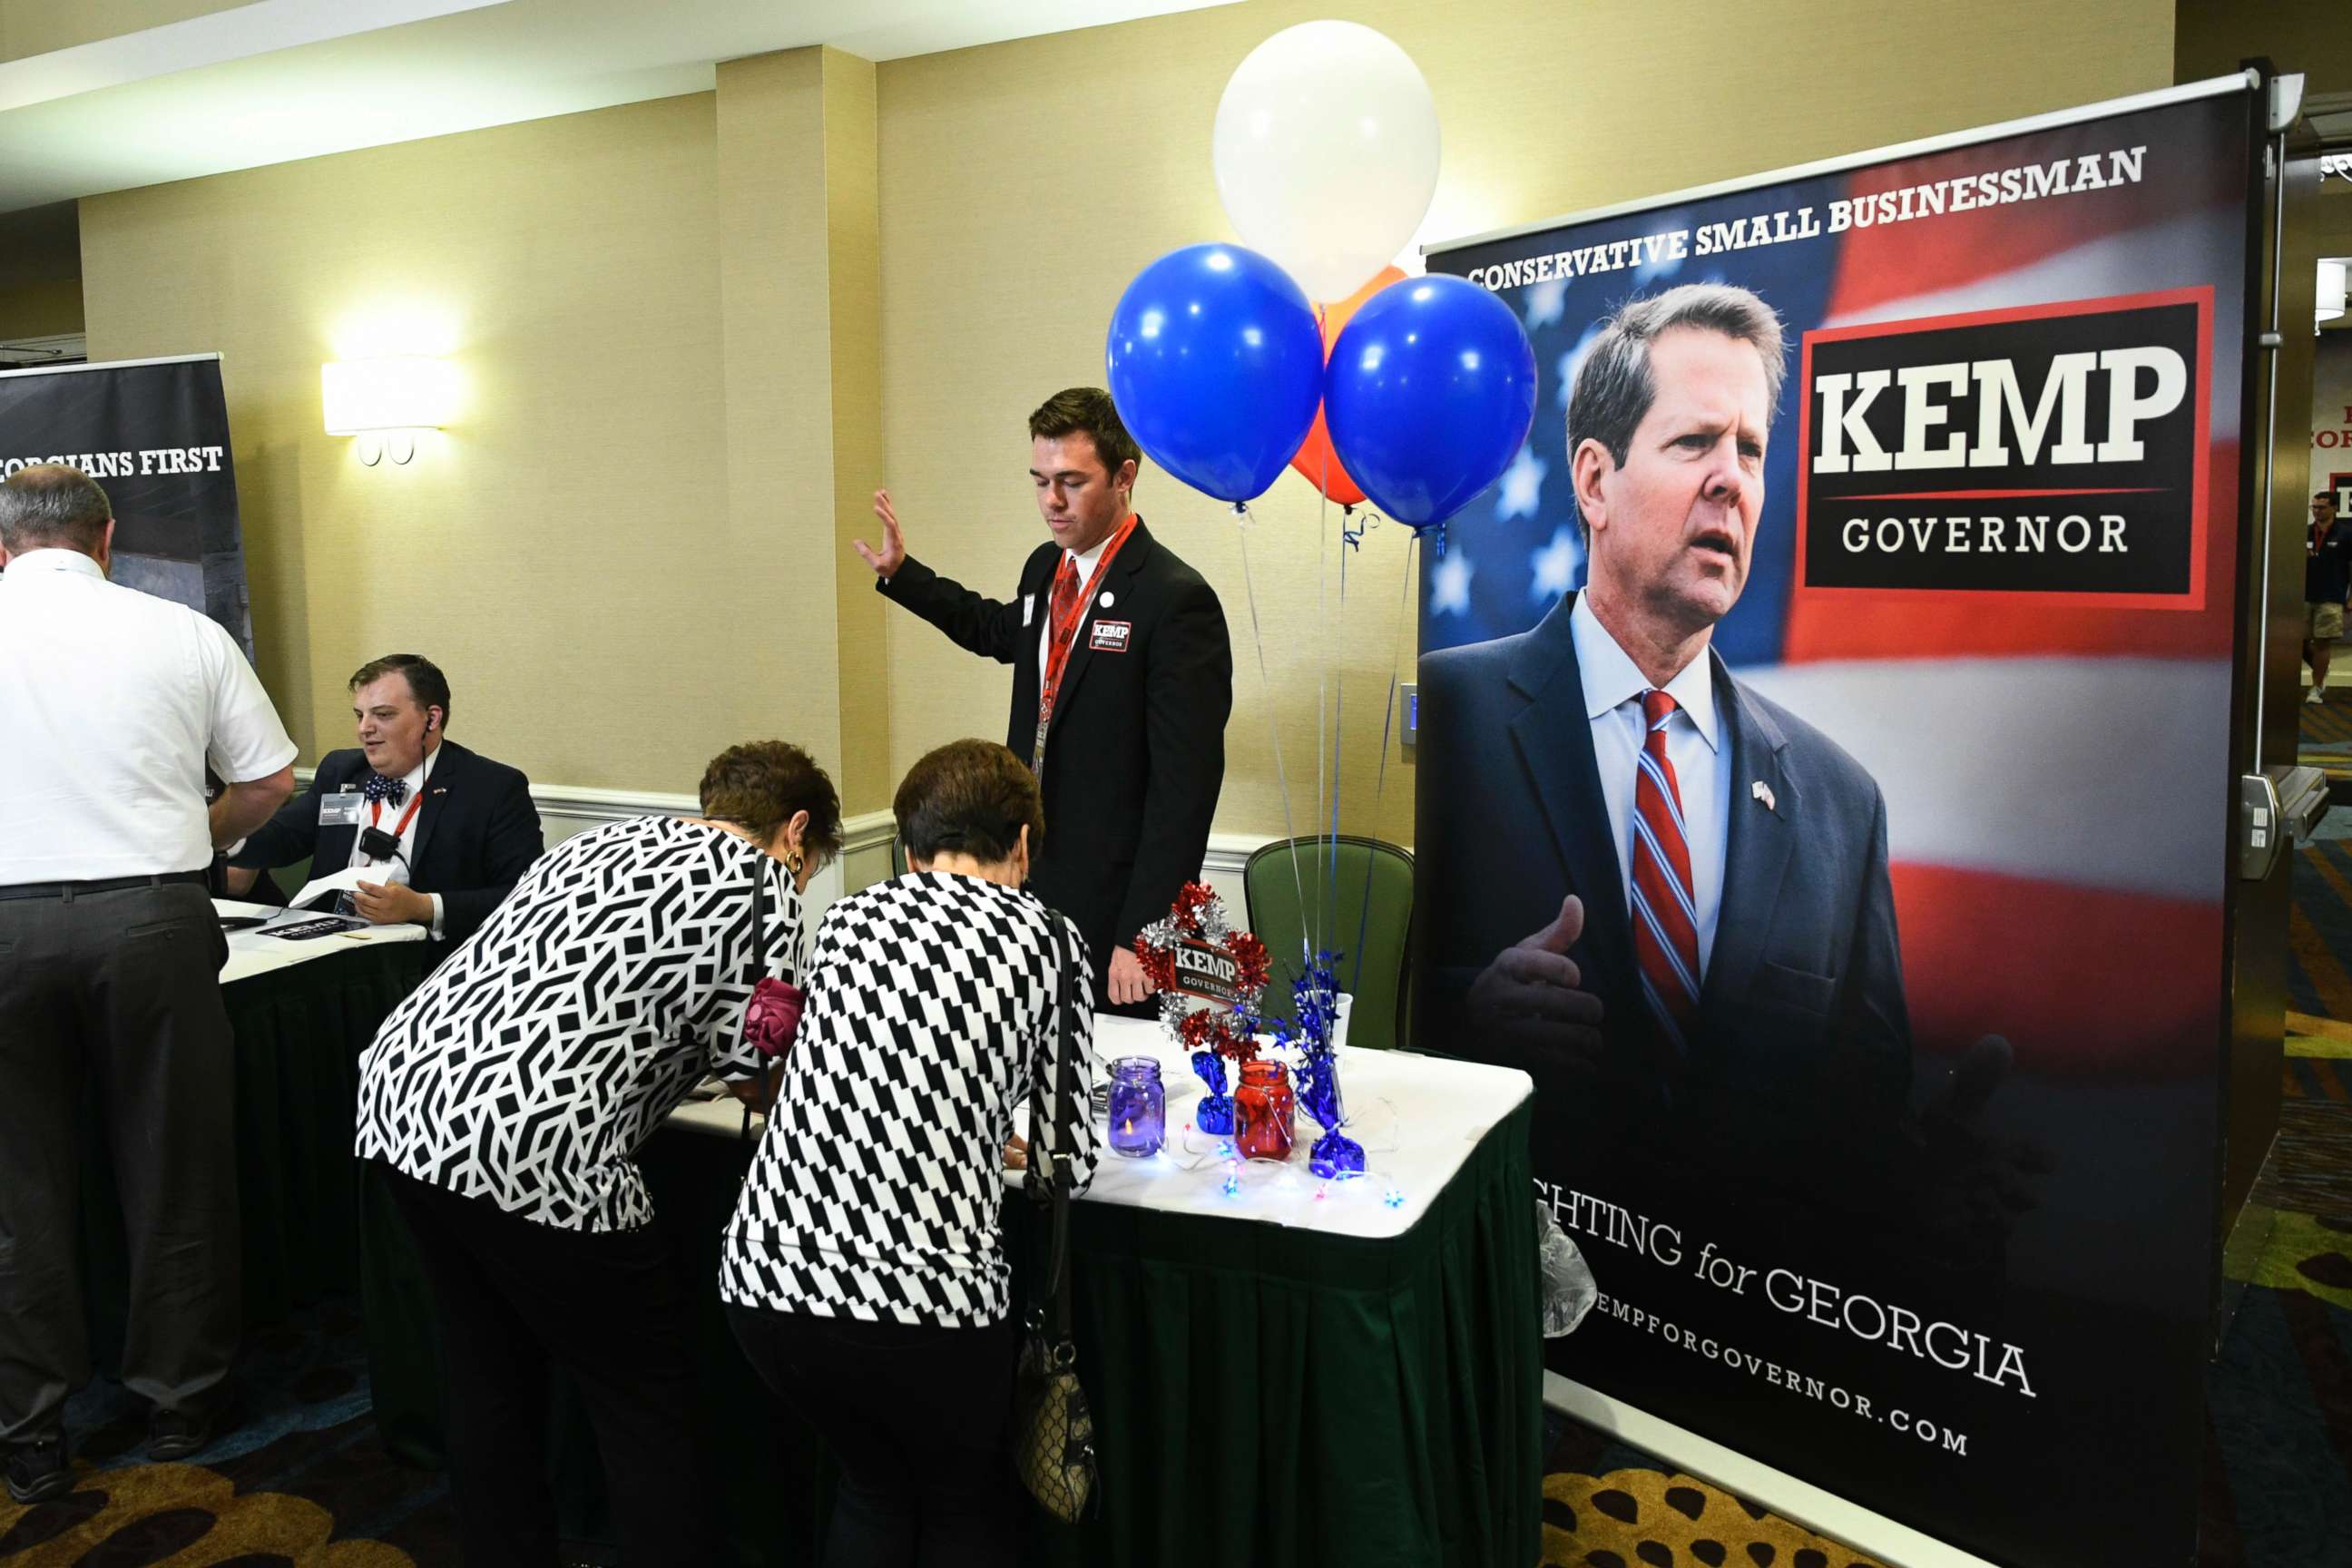 PHOTO: Guests sign in to attend an election night results party for Georgia Secretary of State Brian Kemp, Republican primary candidate for governor, May 22, 2018, in Athens, Ga. 